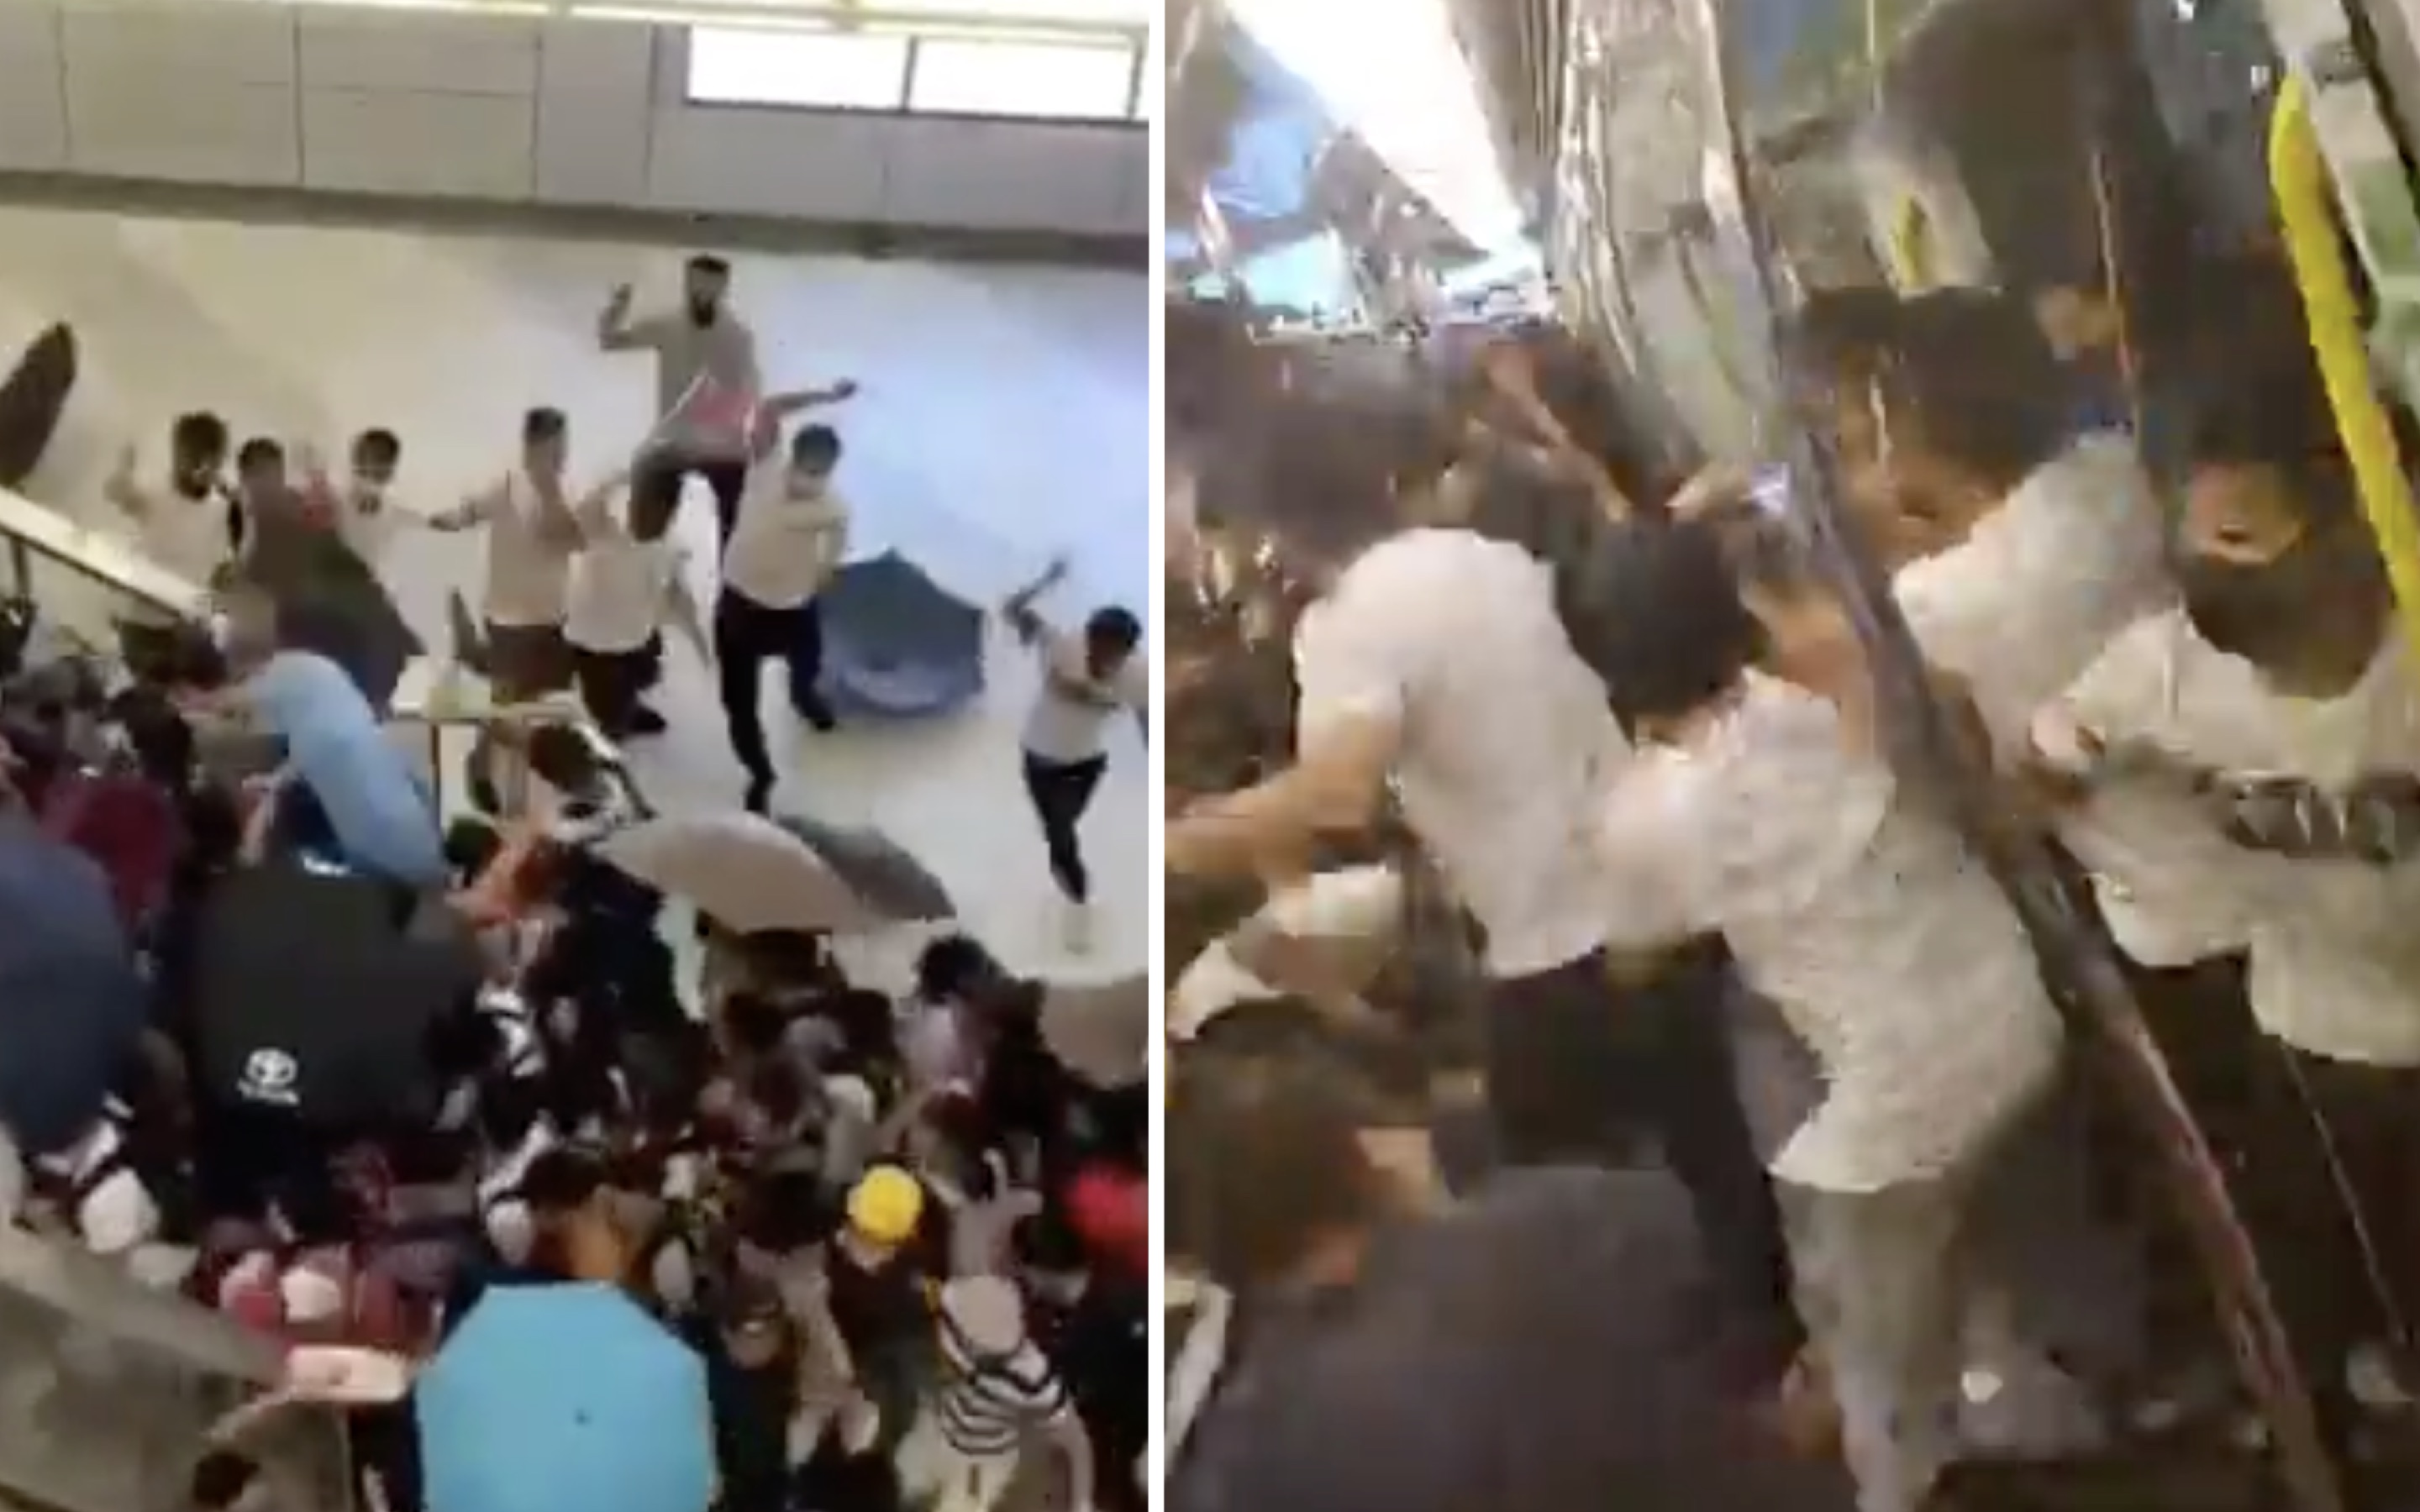 Men in white shirts can be seen indiscriminately beating protesters and passengers shielding themselves from attack in Yuen Long MTR station (left), and attacking others who were driven from the platform into a stationary train (right) on July 21. Screengrabs via Twitter/Facebook.